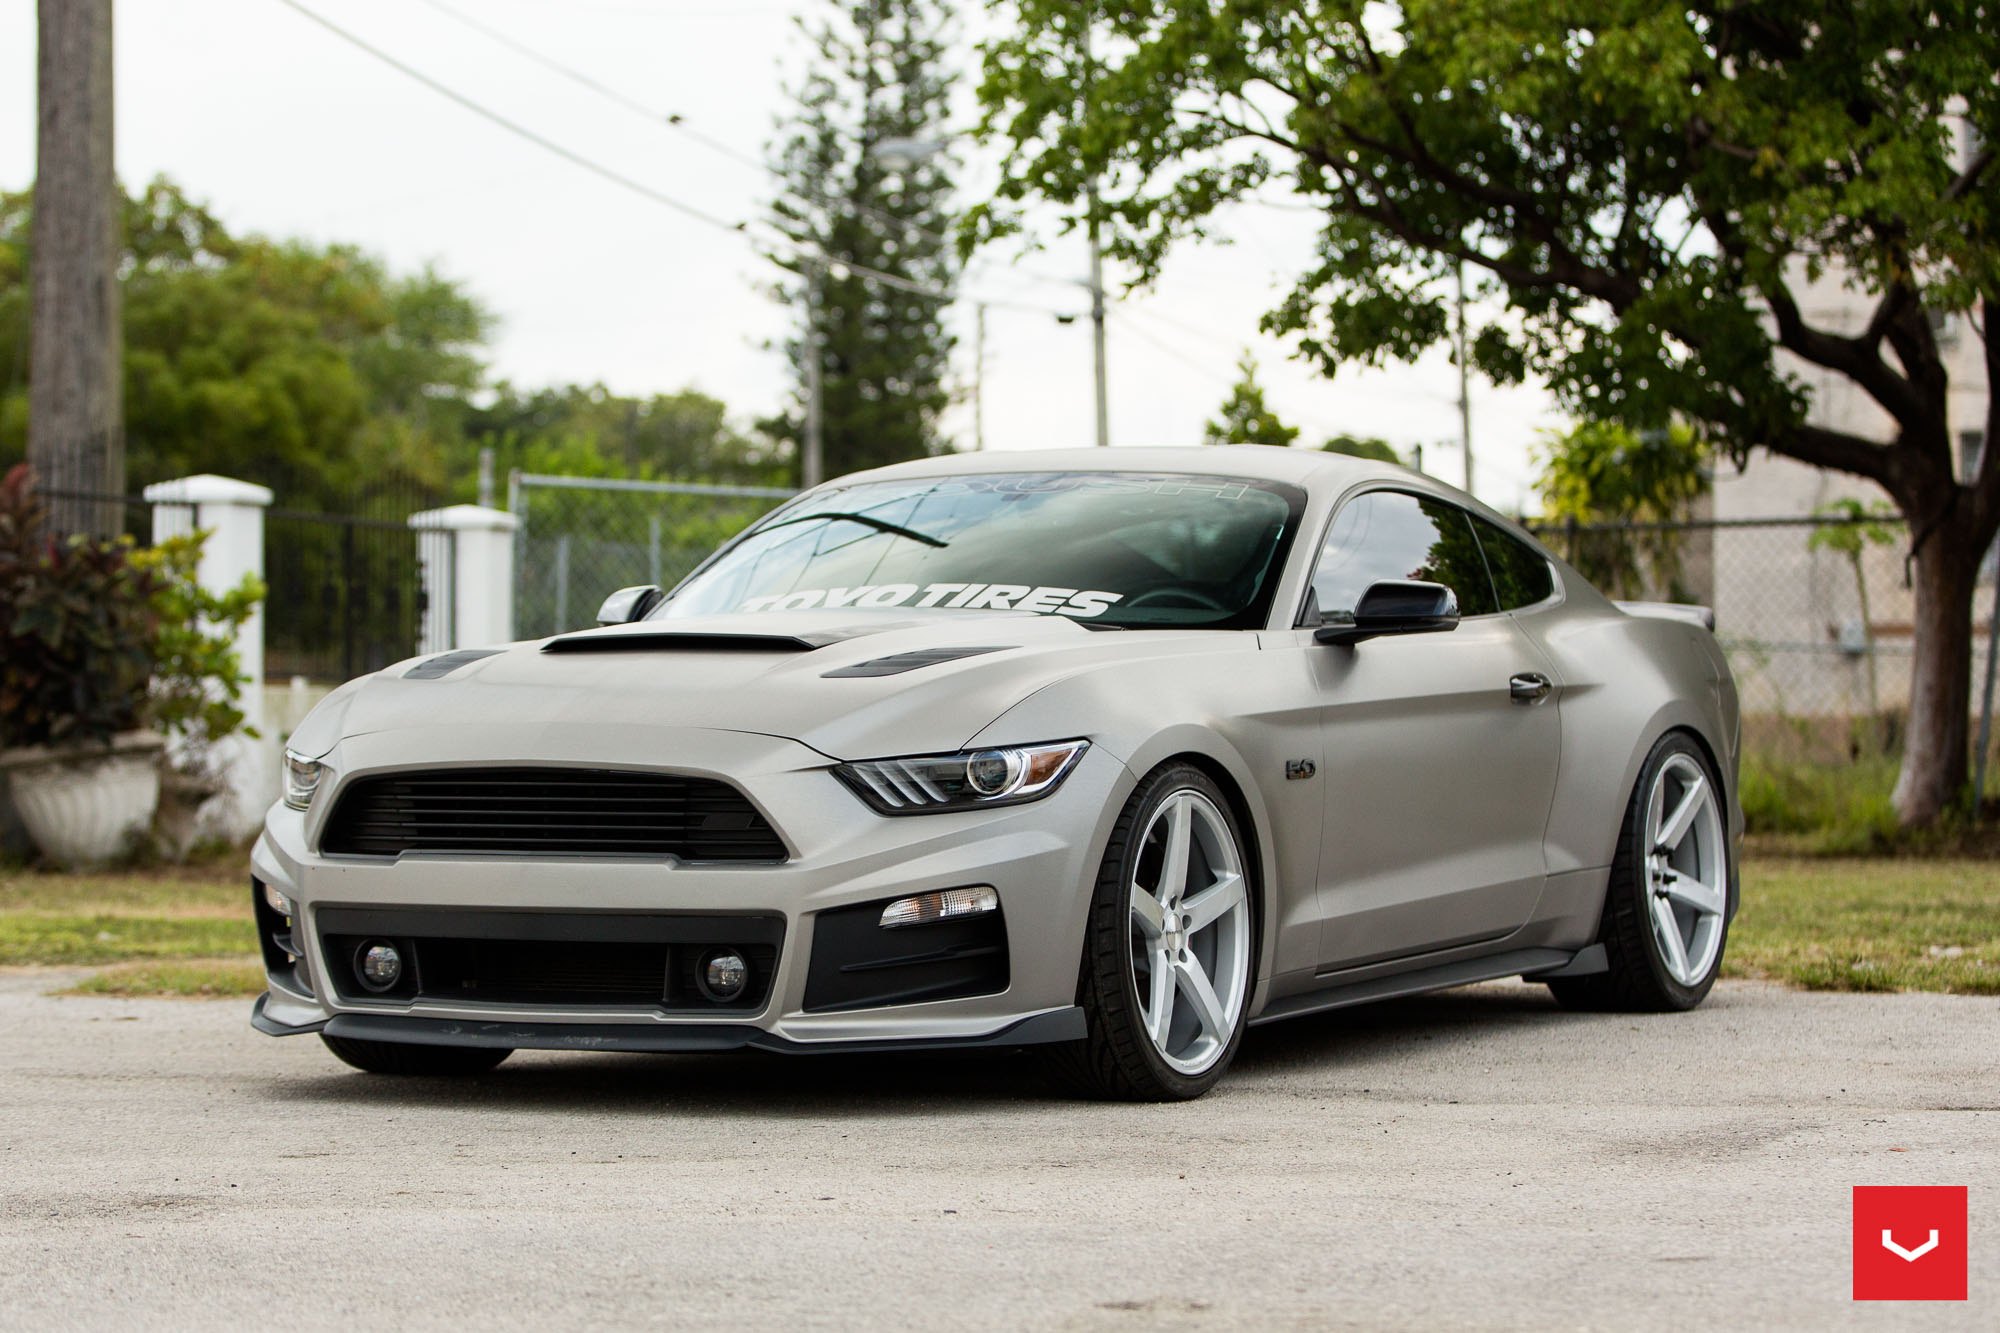 ROUSH Mustang GT 5.0 on Vossen Concave Wheels - Photo by Vossen.